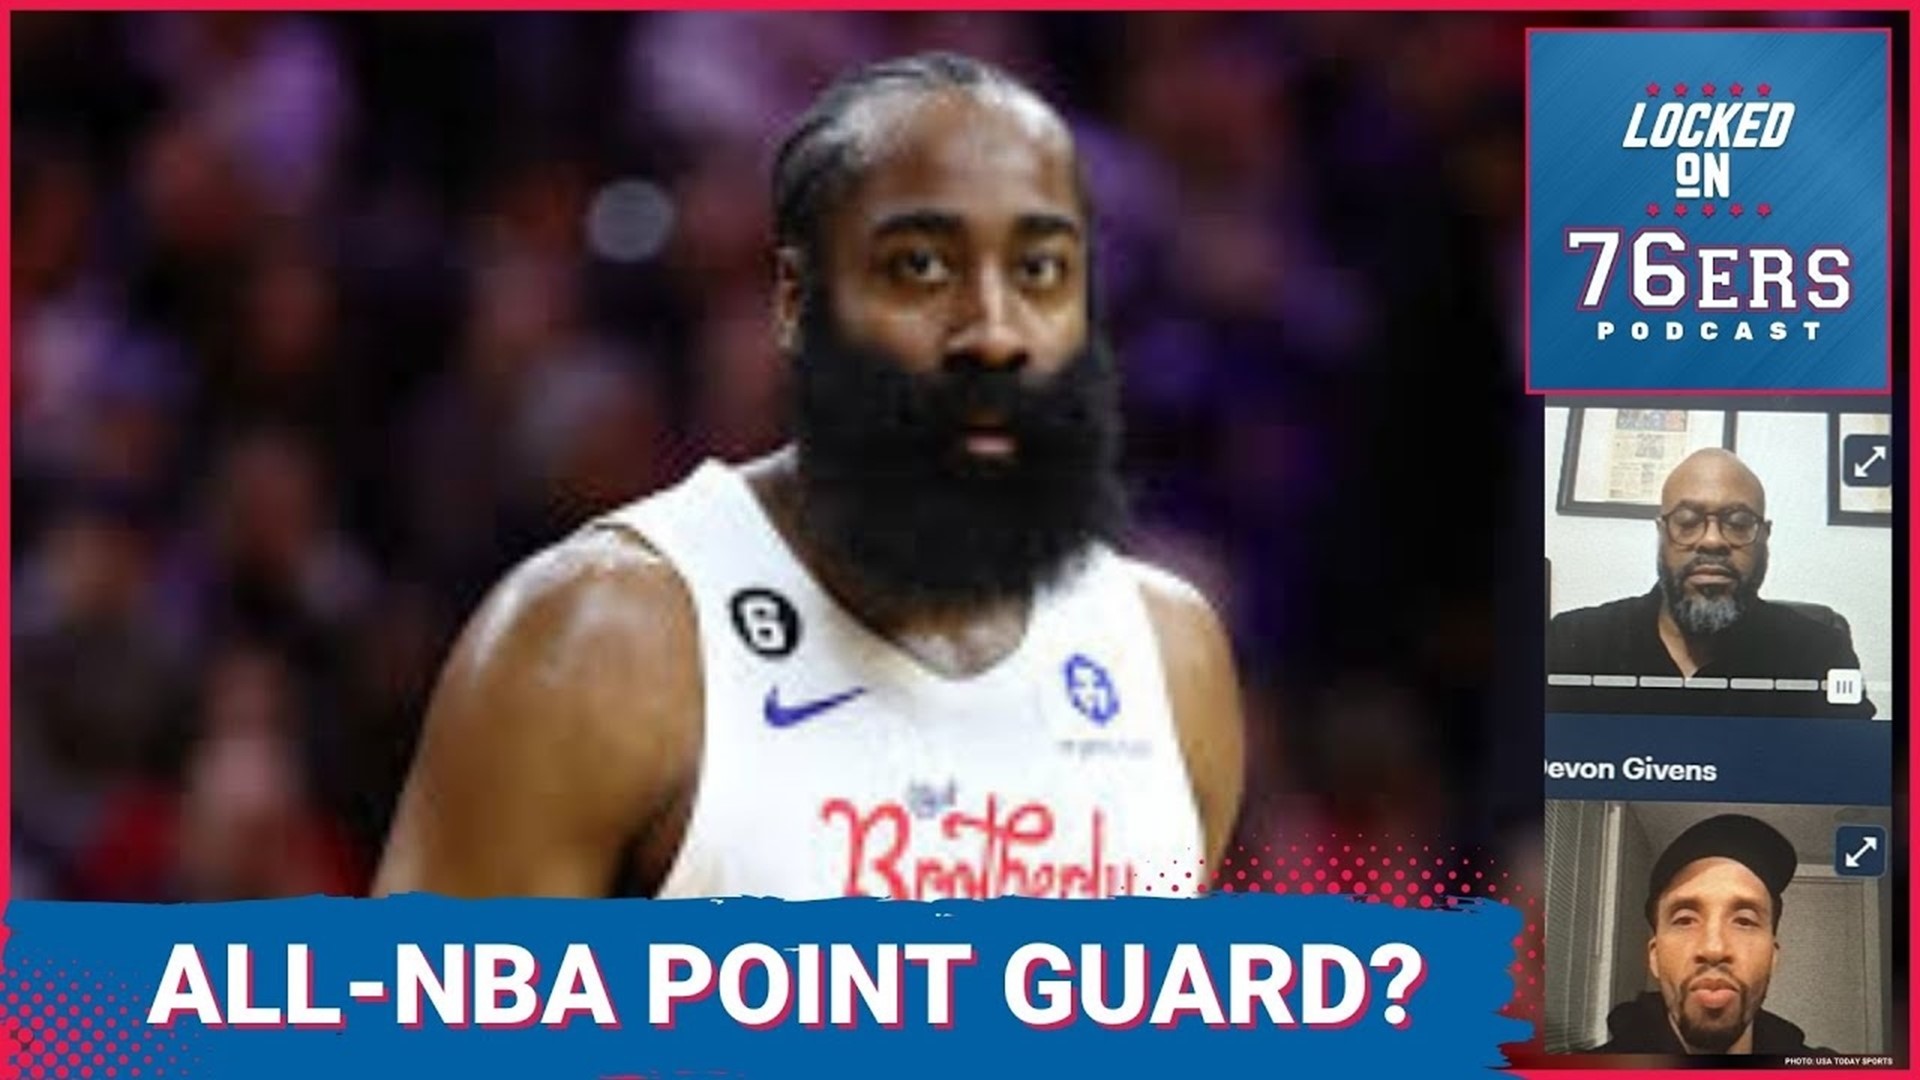 Devon Givens and Keith Pompey make an All-NBA case for 76ers point guard James Harden.